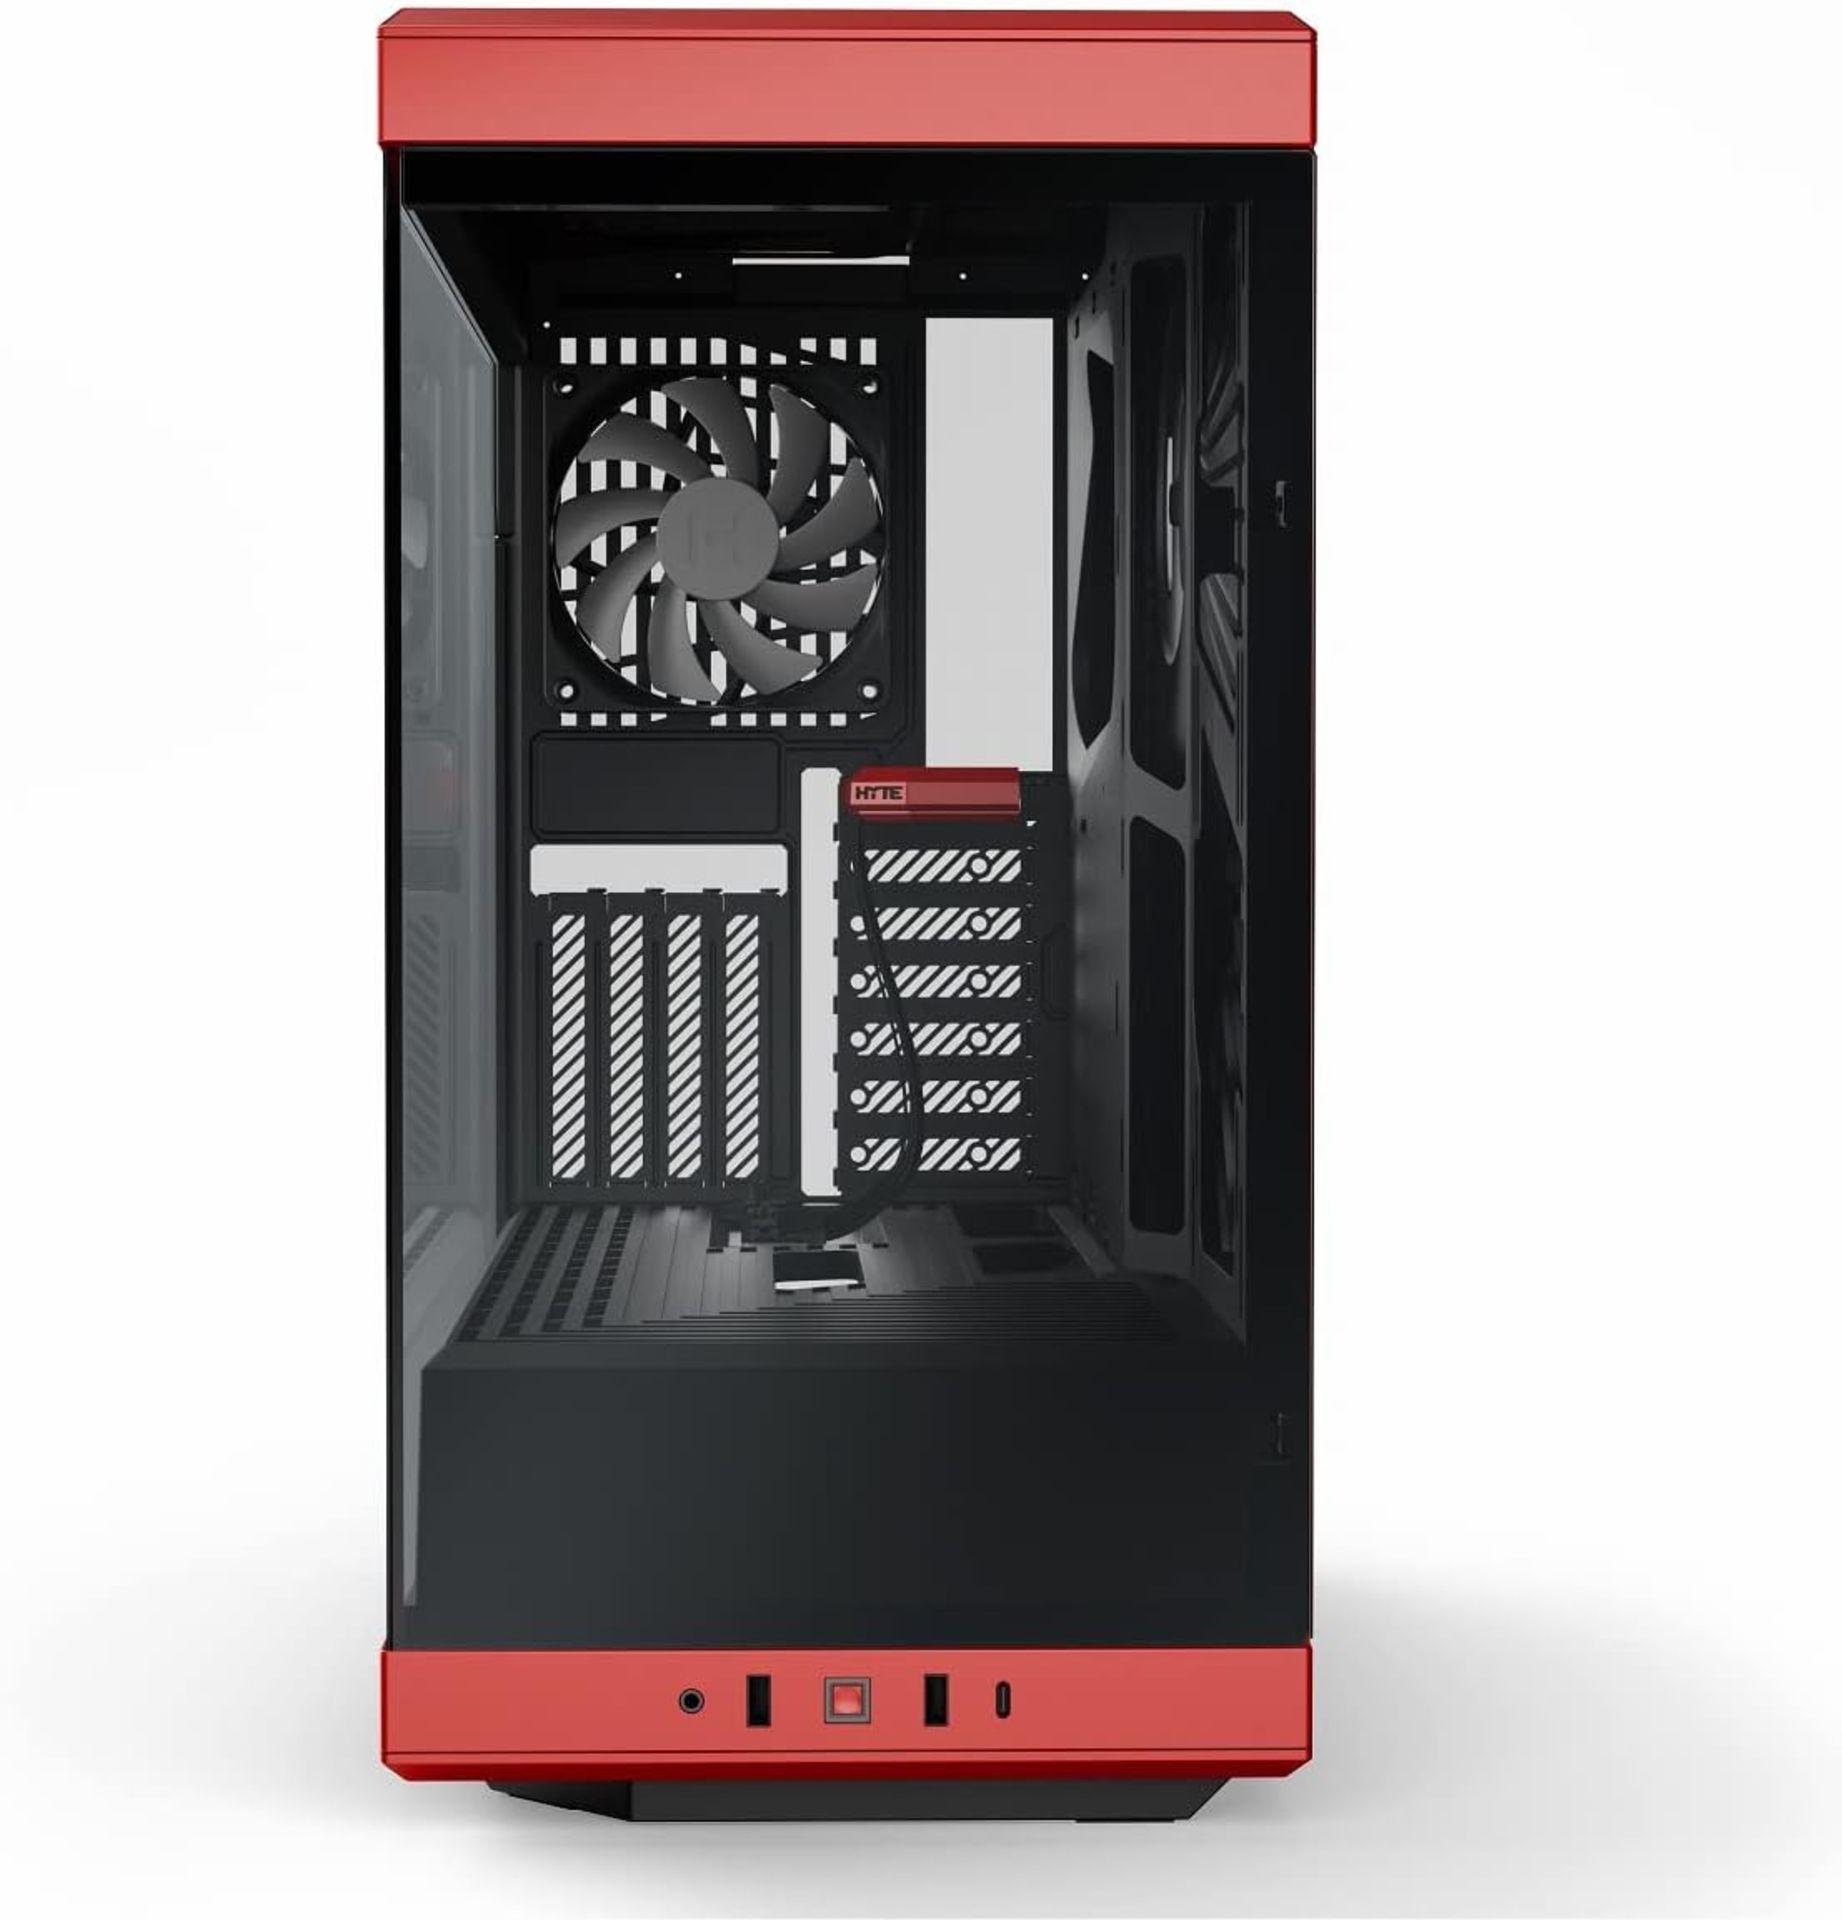 NEW & BOXED HYTE Y40 Mid-Tower ATX Case - Black & Red. RRP £164.99. (R6-7). The HYTE Y40 Mid-Tower - Image 2 of 5